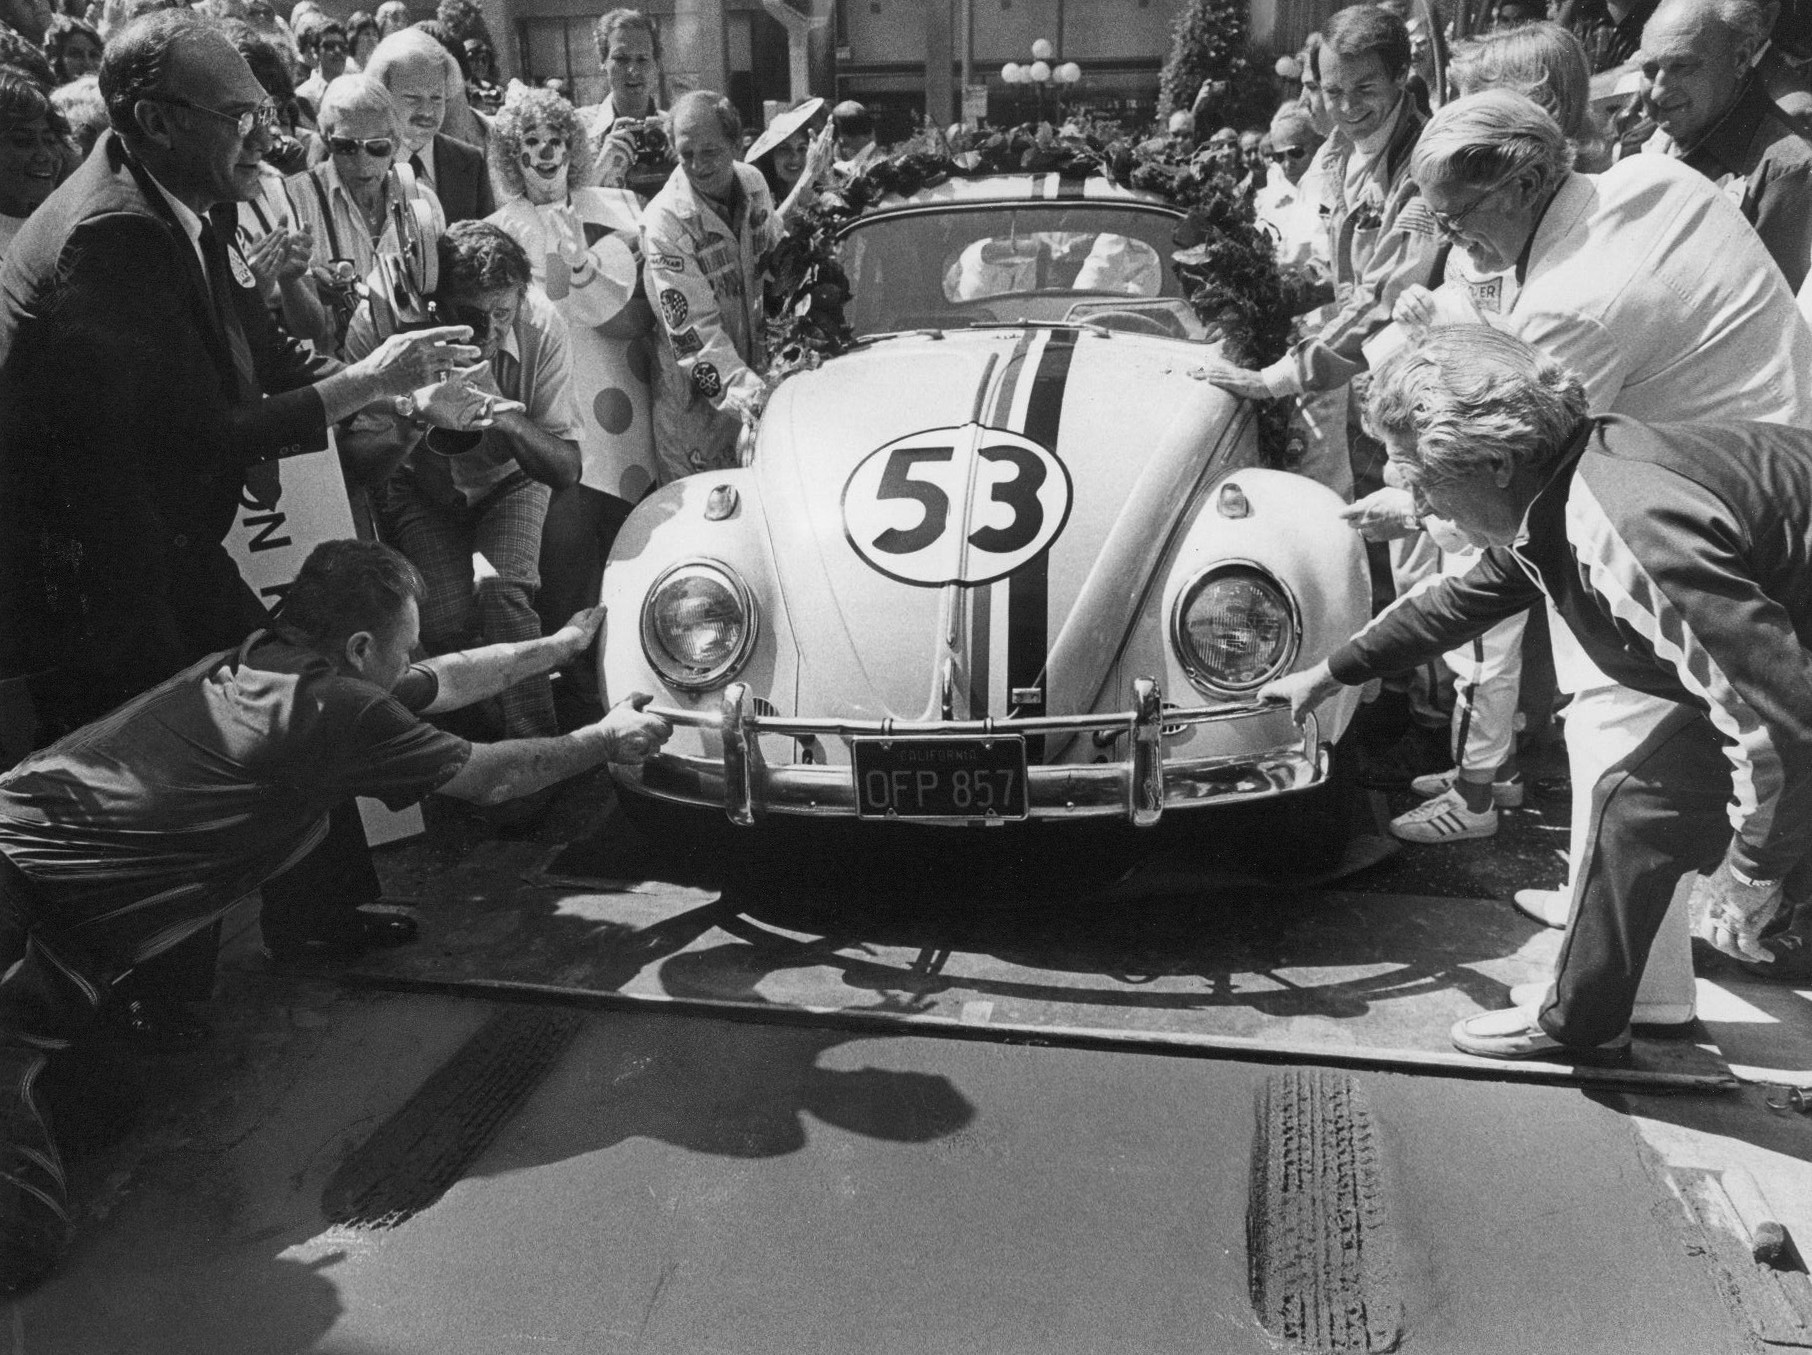 Herbie the love bug leaves a tireprint in the wet cement at the Chinese Theatre in Hollywood for the opening of "Herbie Goes to Monte Carlo," in 1977.